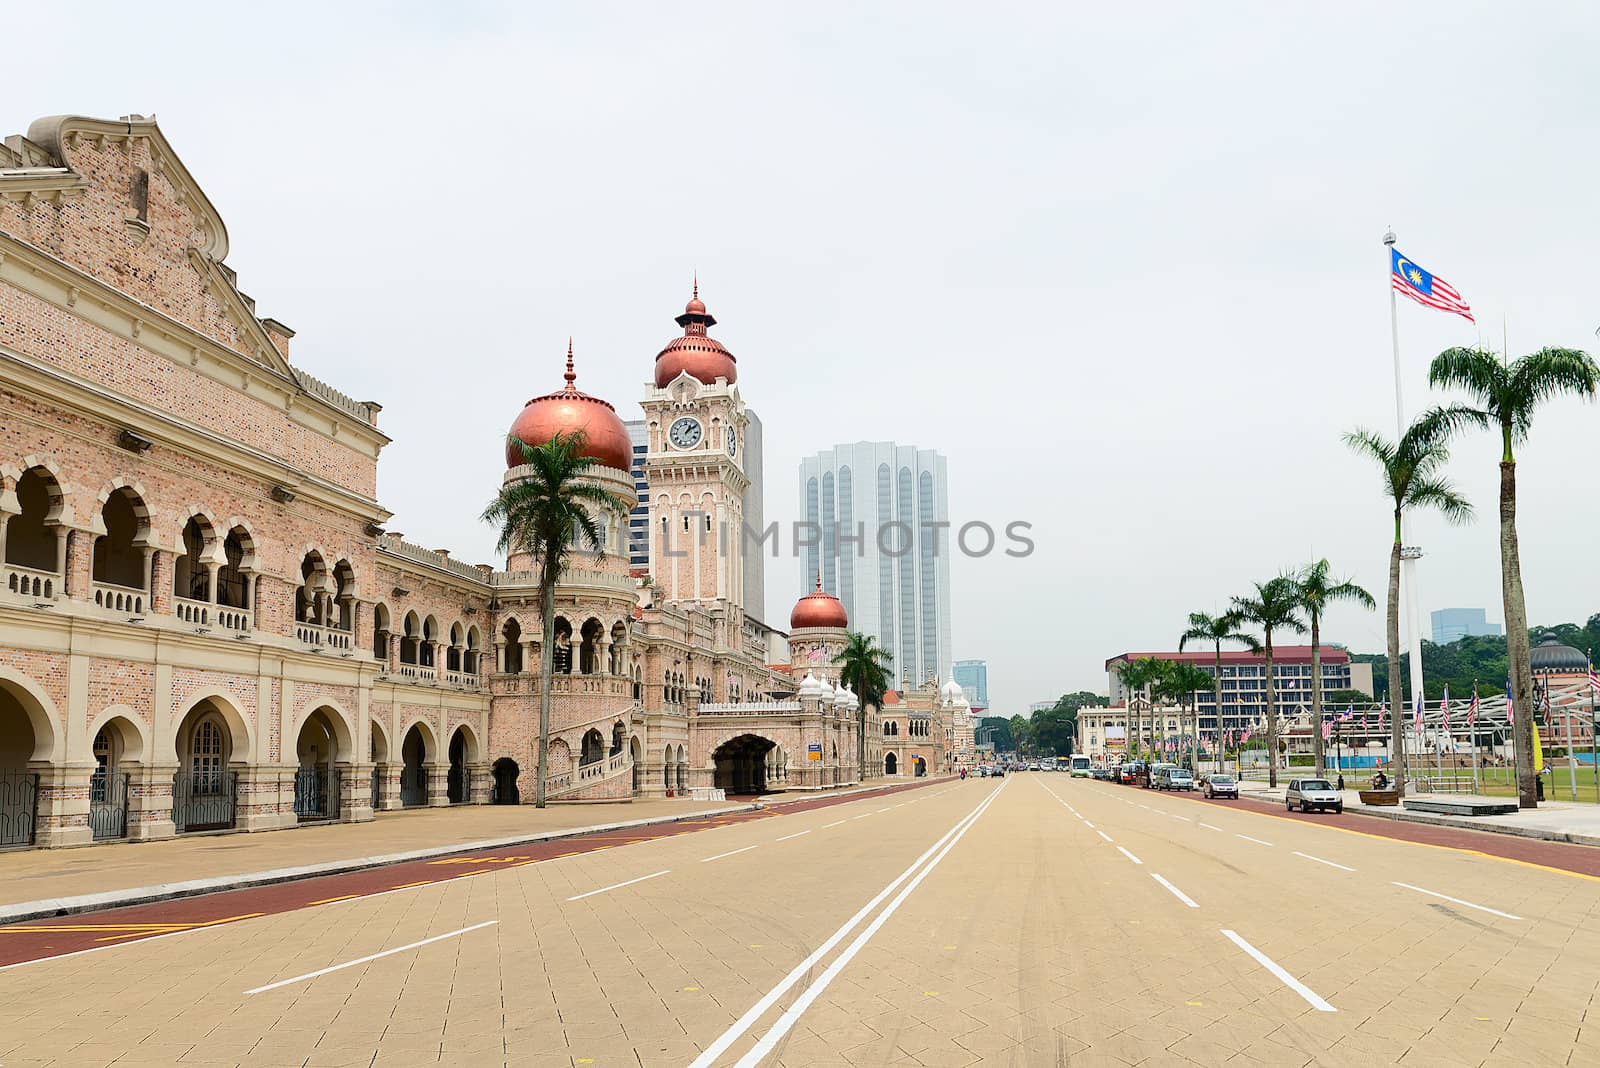 Independence Merdeka Square with Sultan Abdul Samad building and 100m-high flagpole in Kuala Lumpur, Malaysia